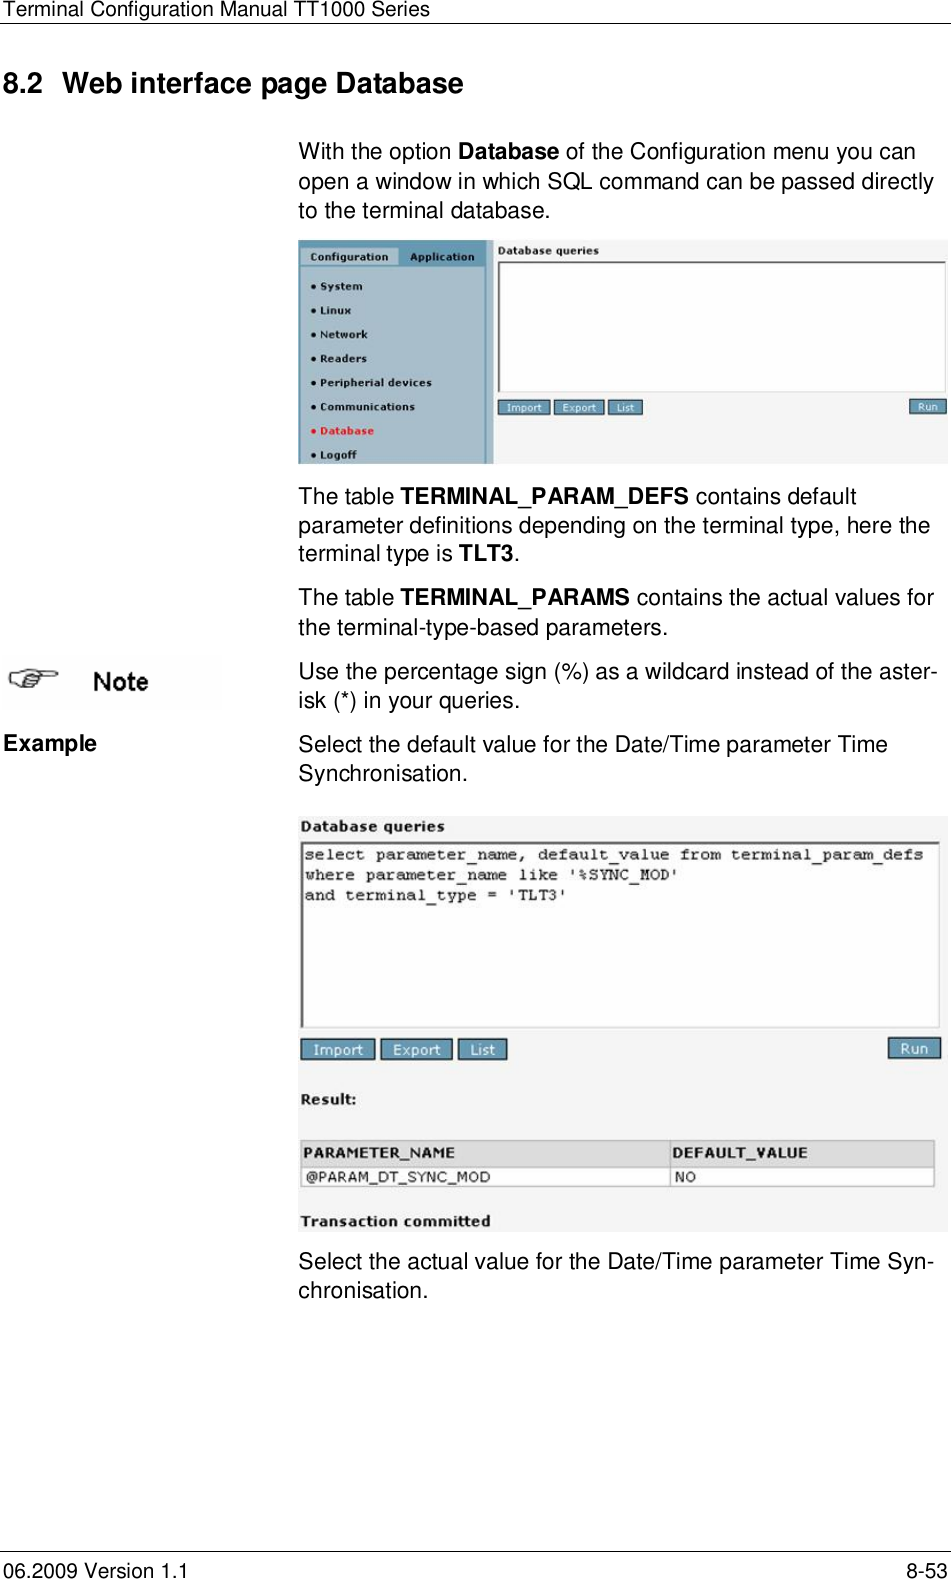 Terminal Configuration Manual TT1000 Series06.2009 Version 1.1 8-538.2  Web interface page DatabaseWith the option Database of the Configuration menu you canopen a window in which SQL command can be passed directlyto the terminal database.The table TERMINAL_PARAM_DEFS contains defaultparameter definitions depending on the terminal type, here theterminal type is TLT3.The table TERMINAL_PARAMS contains the actual values forthe terminal-type-based parameters.Use the percentage sign (%) as a wildcard instead of the aster-isk (*) in your queries.Example Select the default value for the Date/Time parameter TimeSynchronisation.Select the actual value for the Date/Time parameter Time Syn-chronisation.